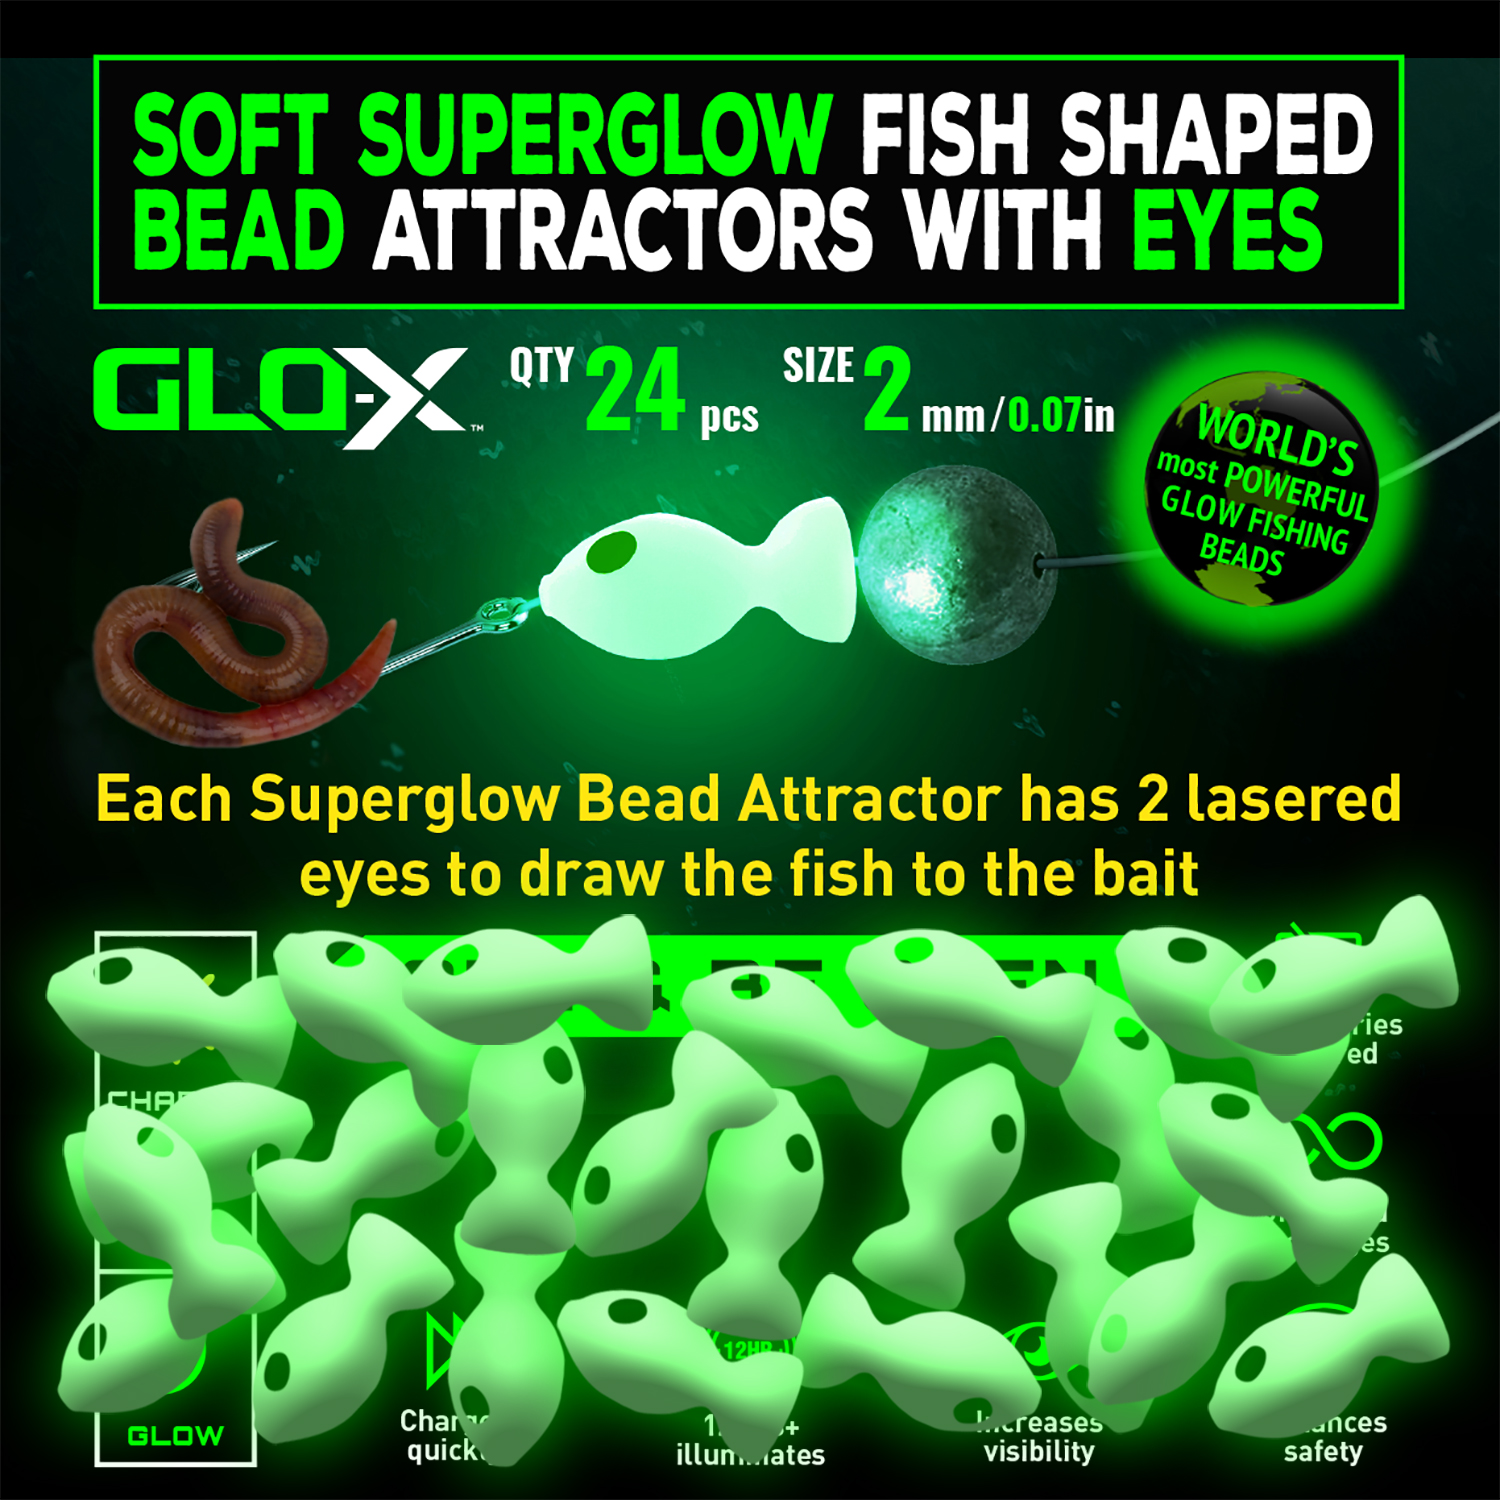 GLO-X Superglow 24 Pcs Soft Fish Bead Attractors With Eyes | GLO-X  Australia - See and Be Seen